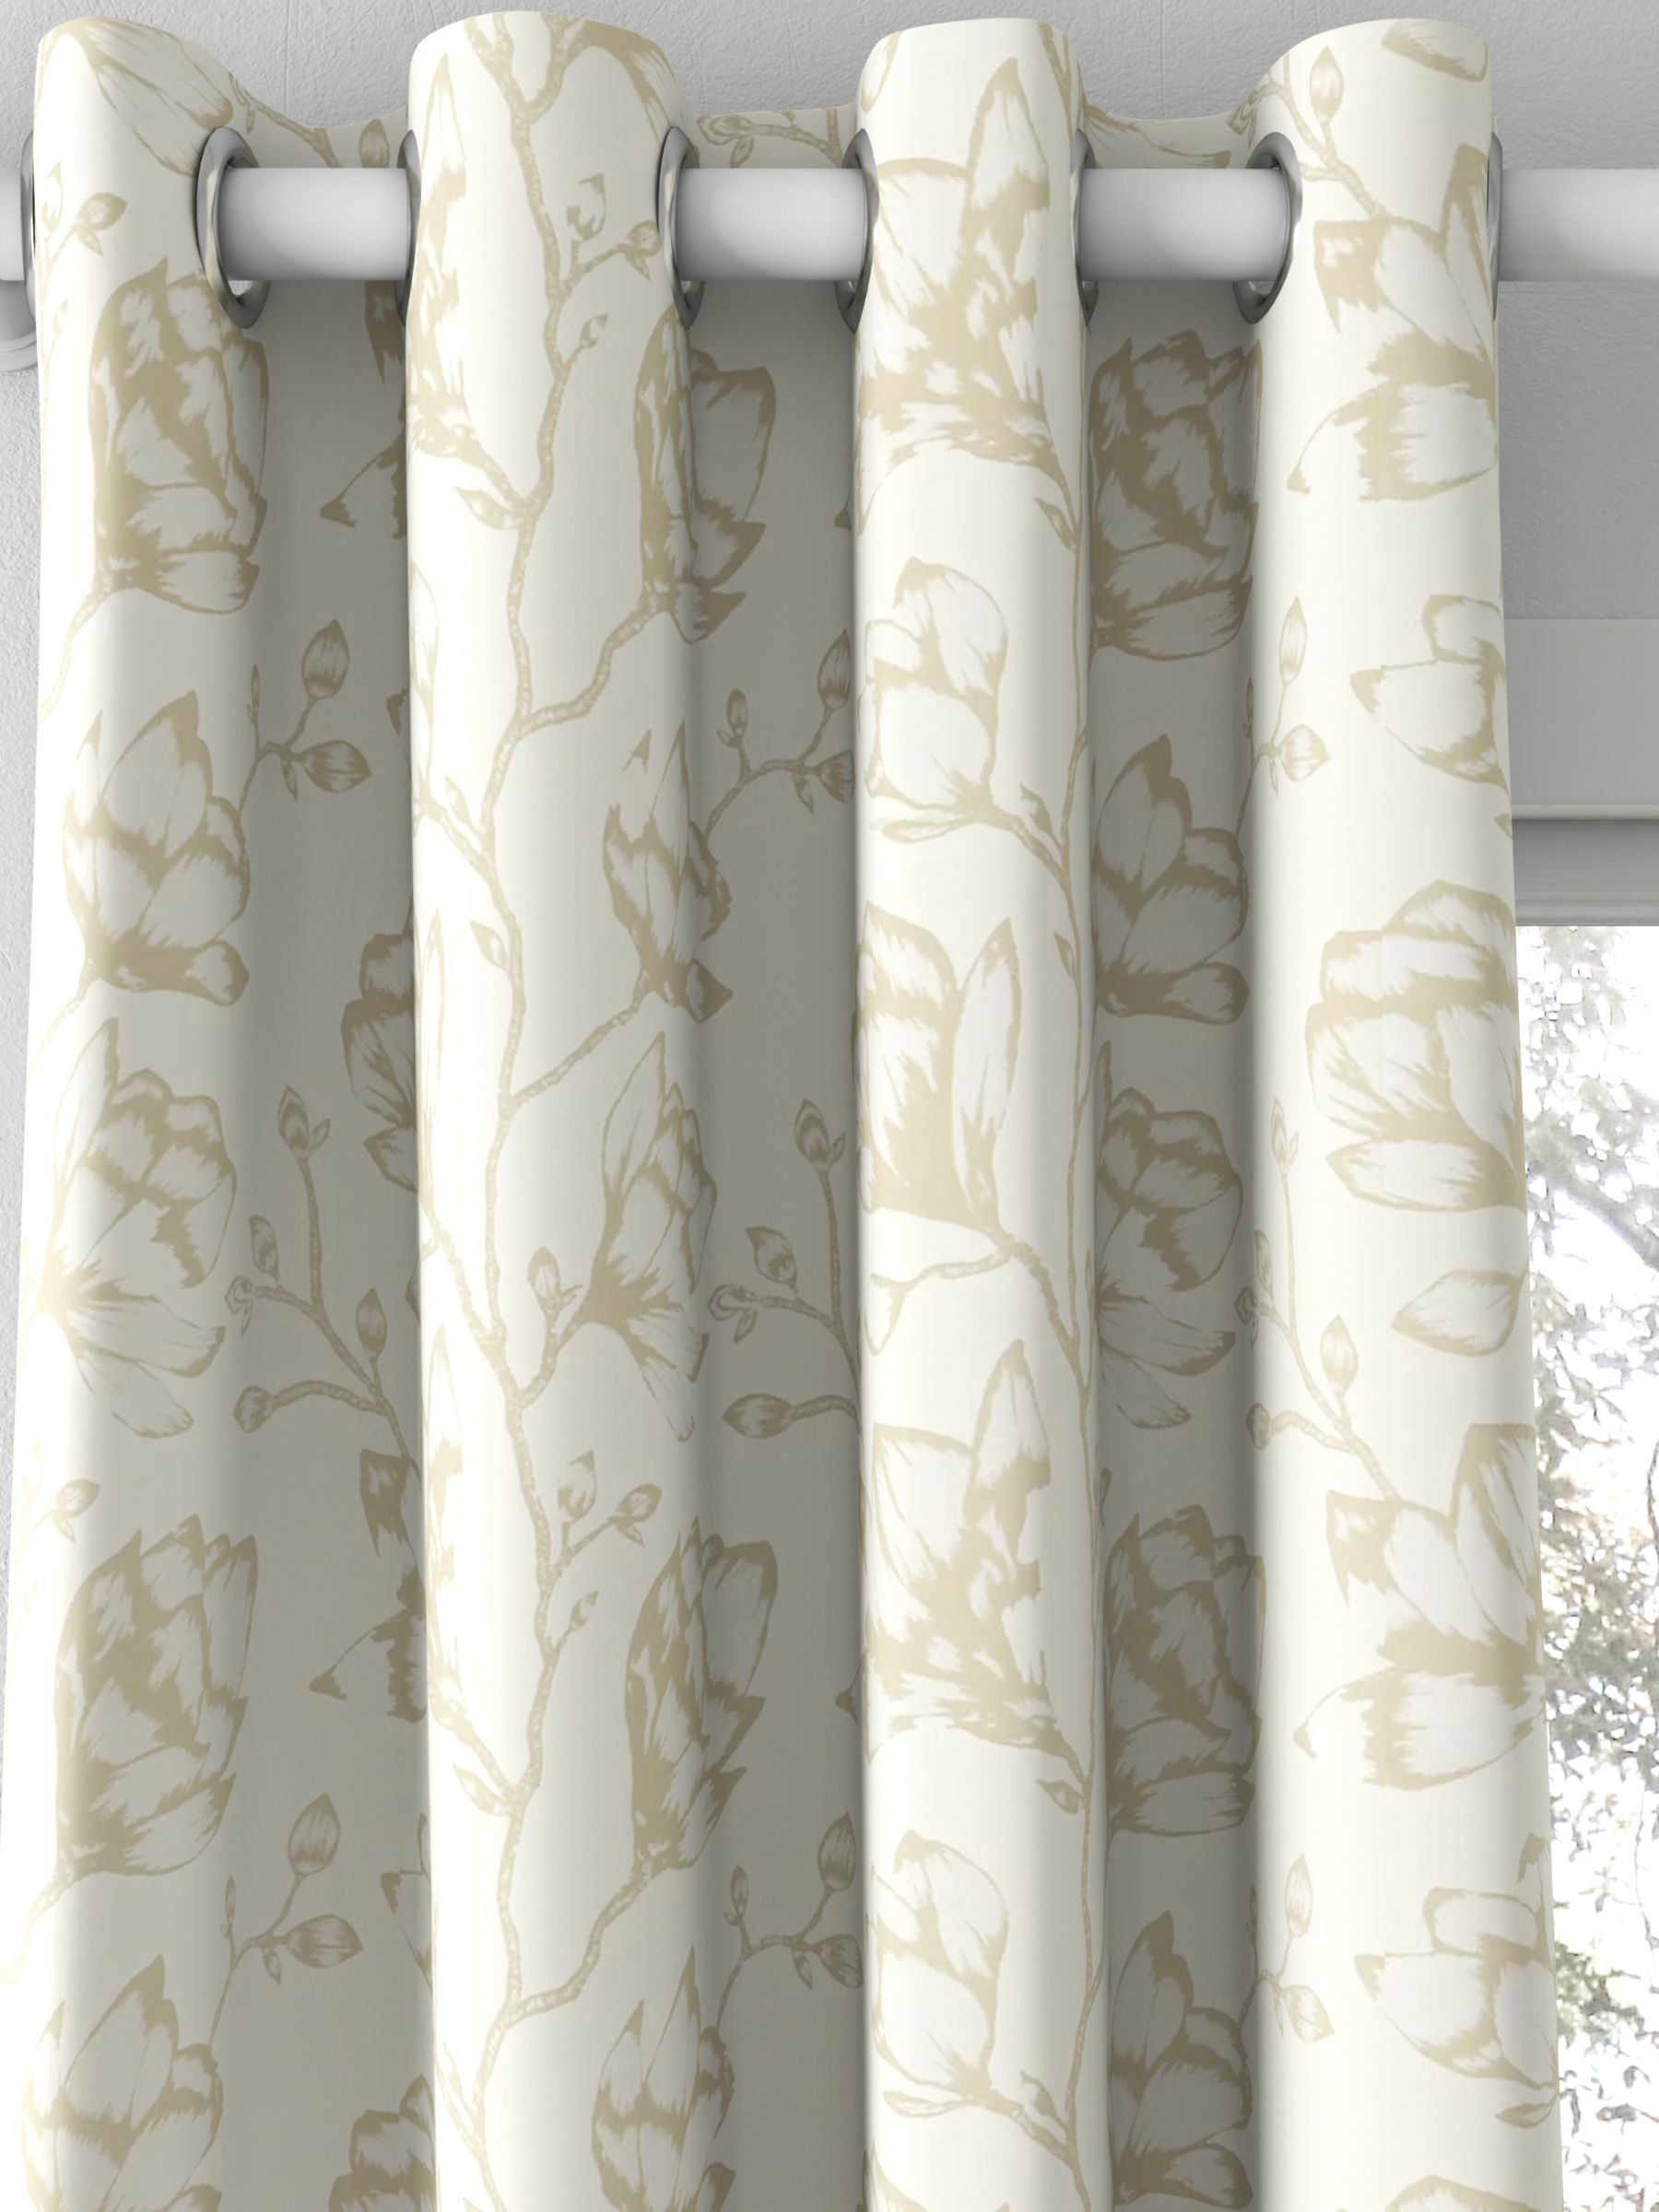 Harlequin Lustica Made to Measure Curtains, Oyster